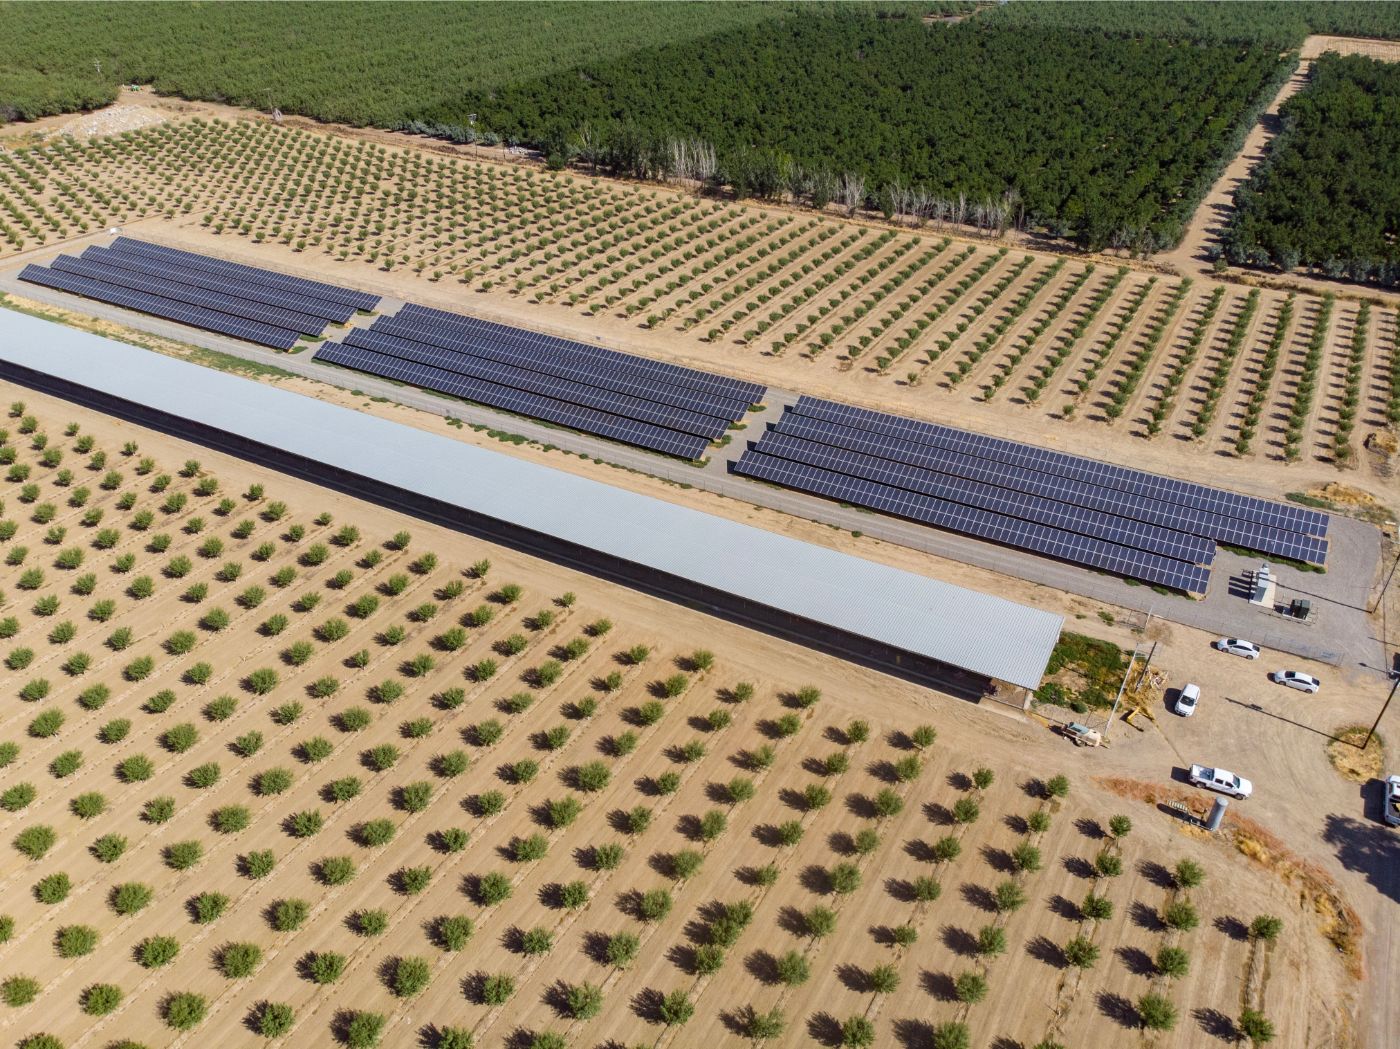 Aerial view of solar farm at Iyer Farms surrounded by planted crops and trees.